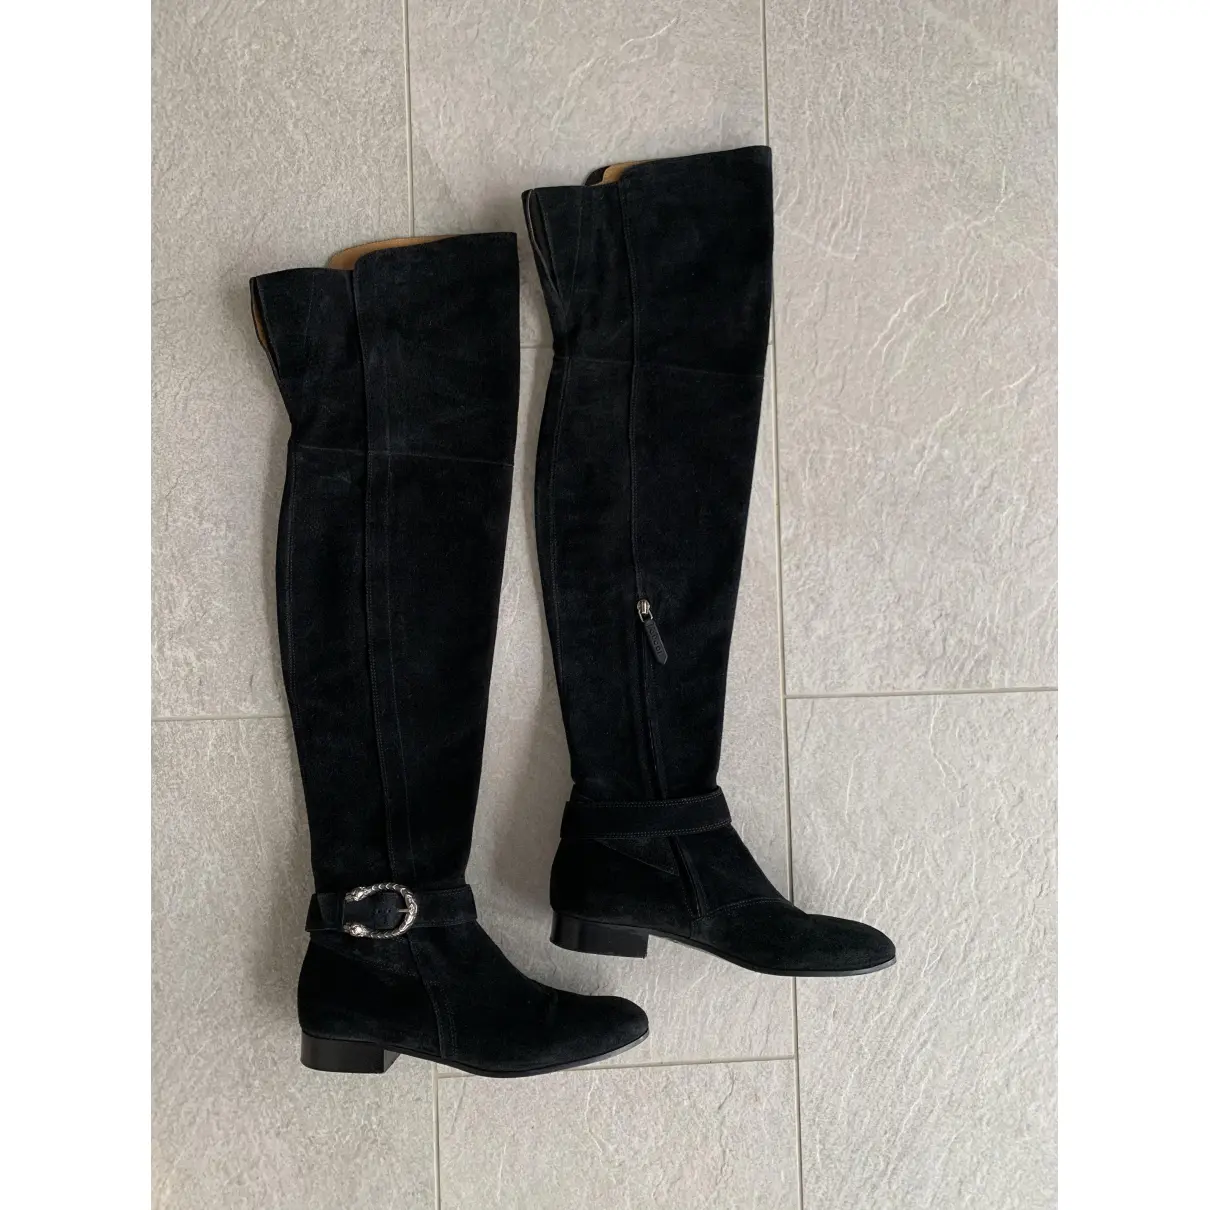 Buy Gucci Riding boots online